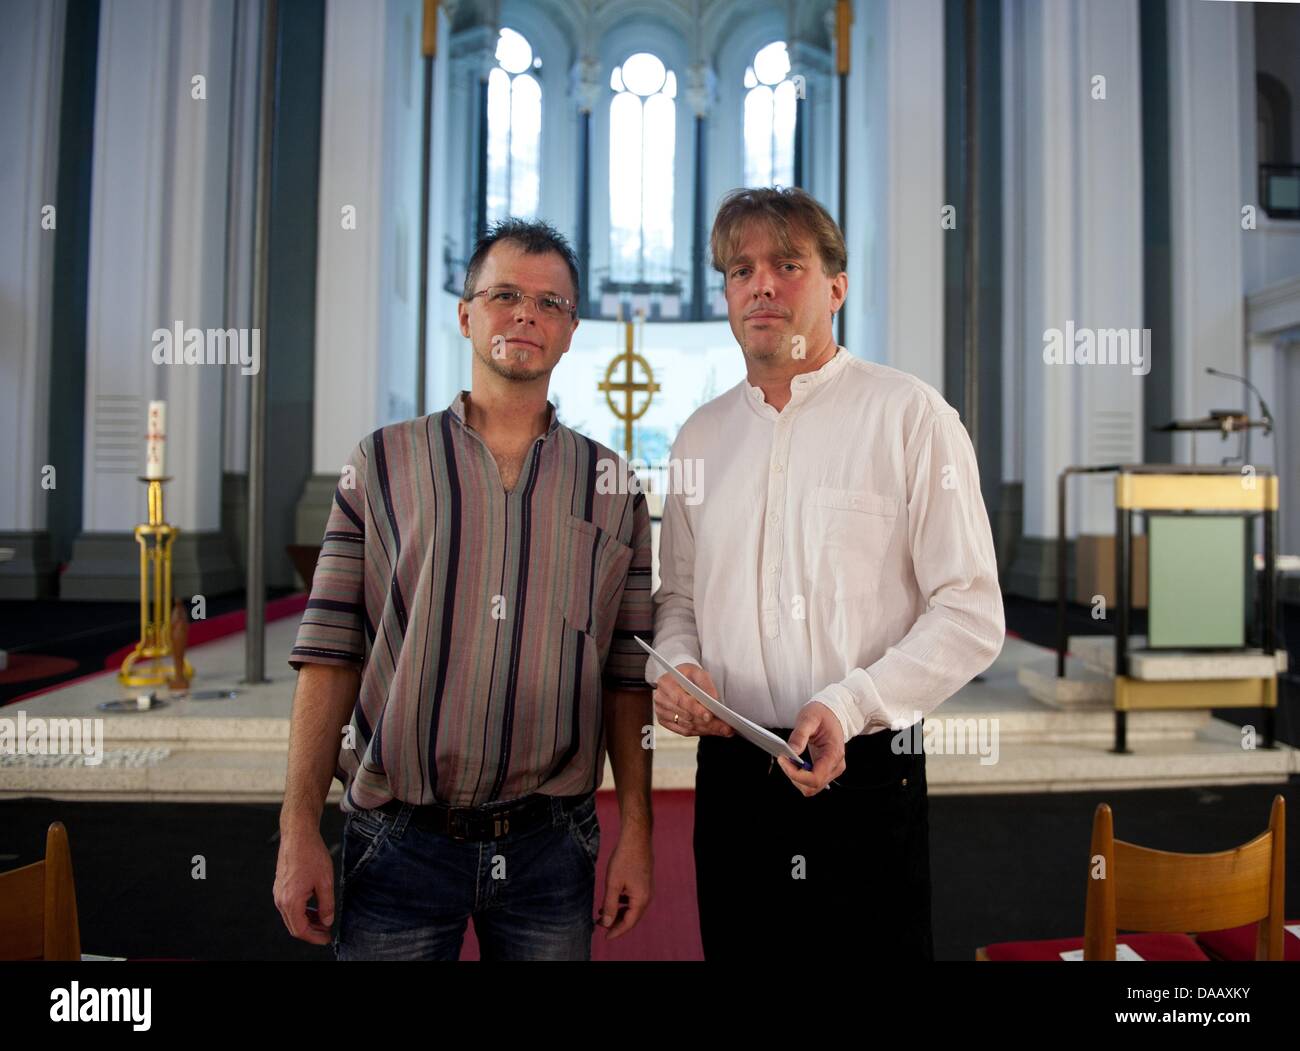 Priest Christoph Schmidt (L) and Norbert Reichers pose before the beginning of a religious service in the Evangelical St. Thomas Church in Berlin, Germany, 21 September 2011. The archbichopric criticized that St. Thomas parish is letting both homosexual priests, who have been suspended, give e relgious service in their rooms. Photo: JOERG CARSTENSEN Stock Photo